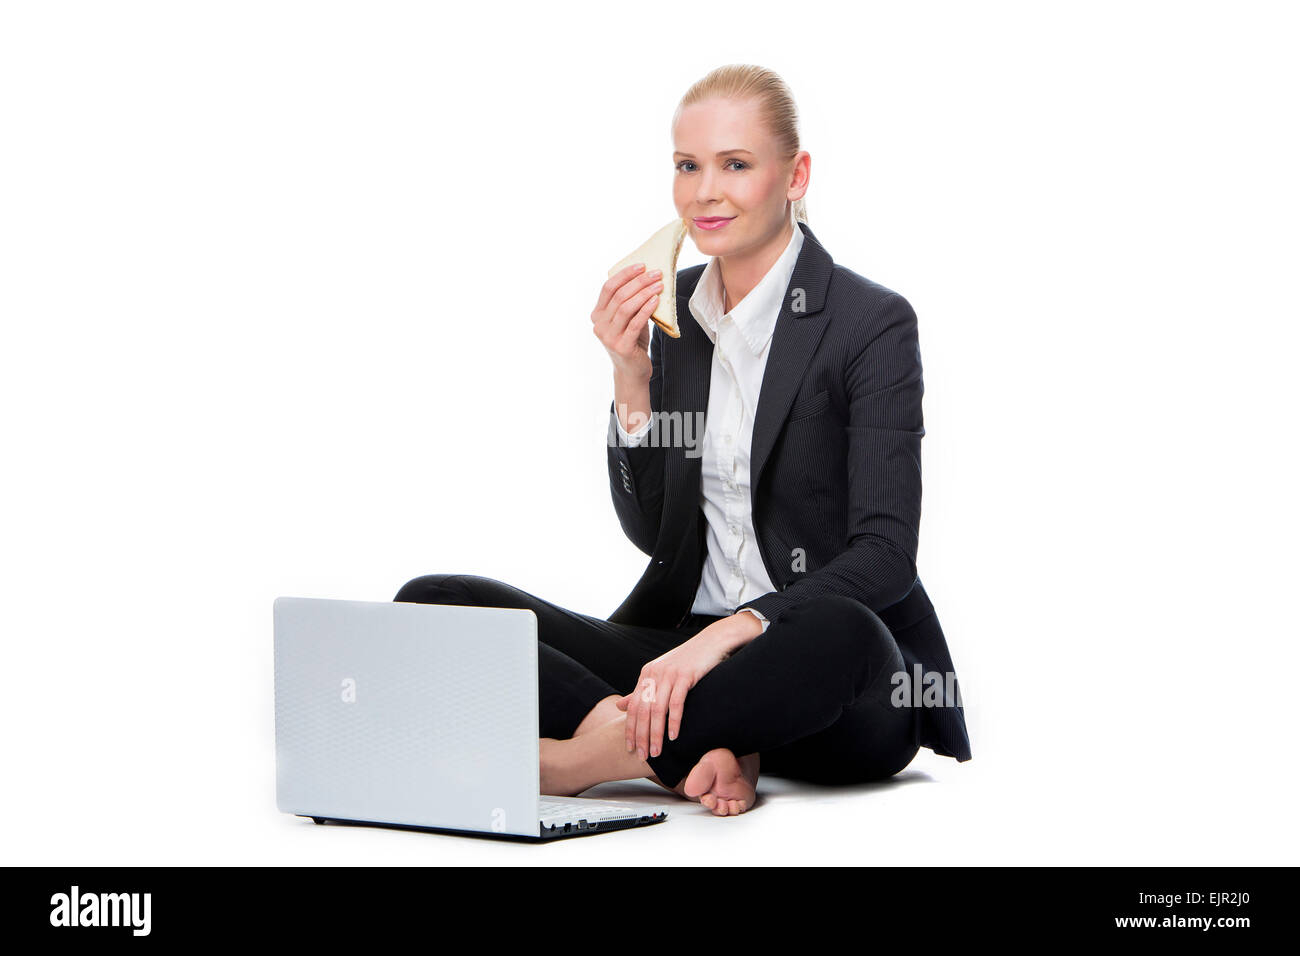 blonde businesswoman seated on the floor with computer and eating a sandwich Stock Photo